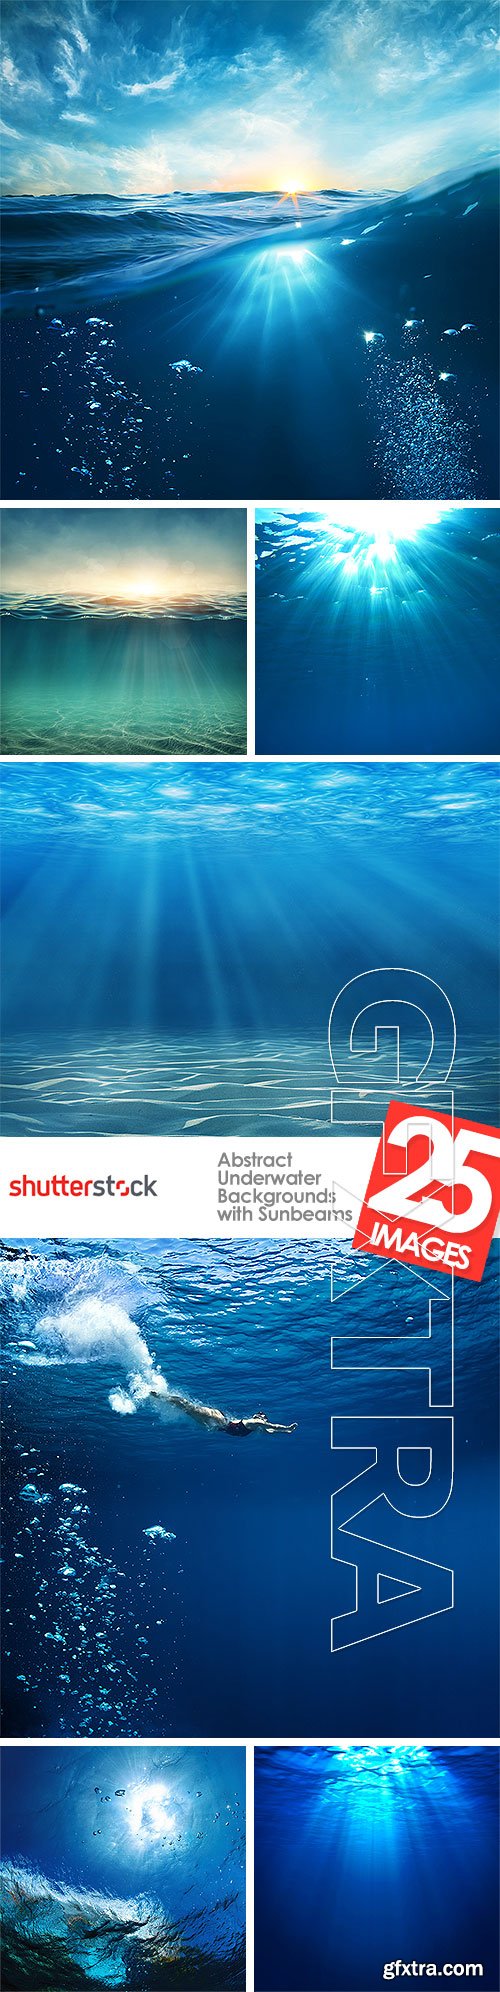 Abstract Underwater Backgrounds with Sunbeams 25xJPG